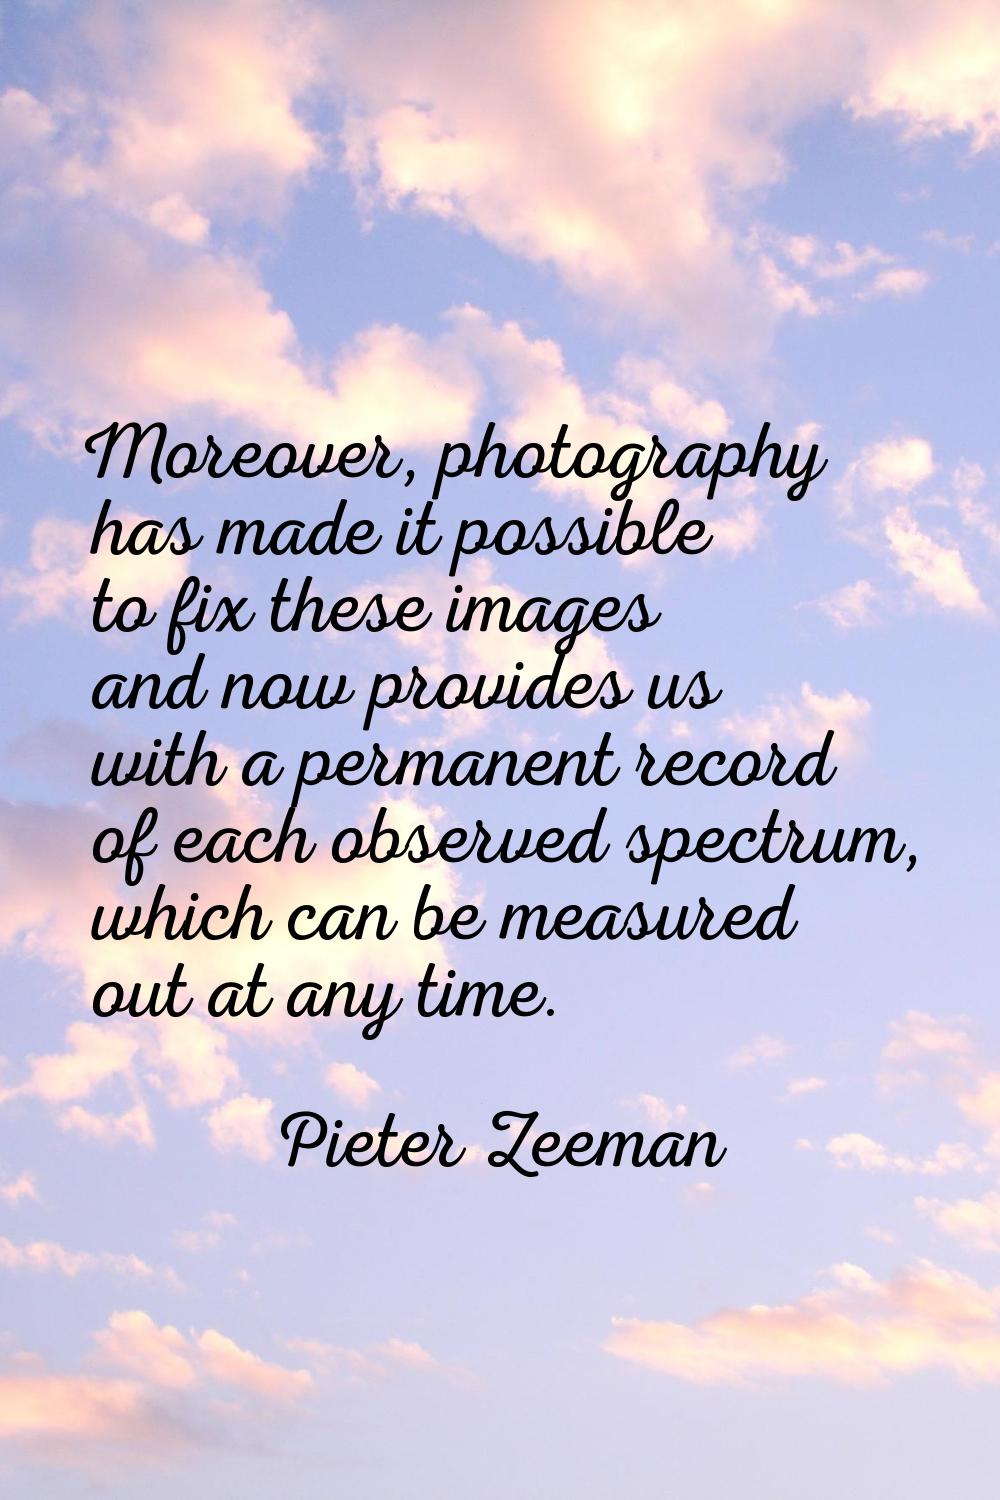 Moreover, photography has made it possible to fix these images and now provides us with a permanent